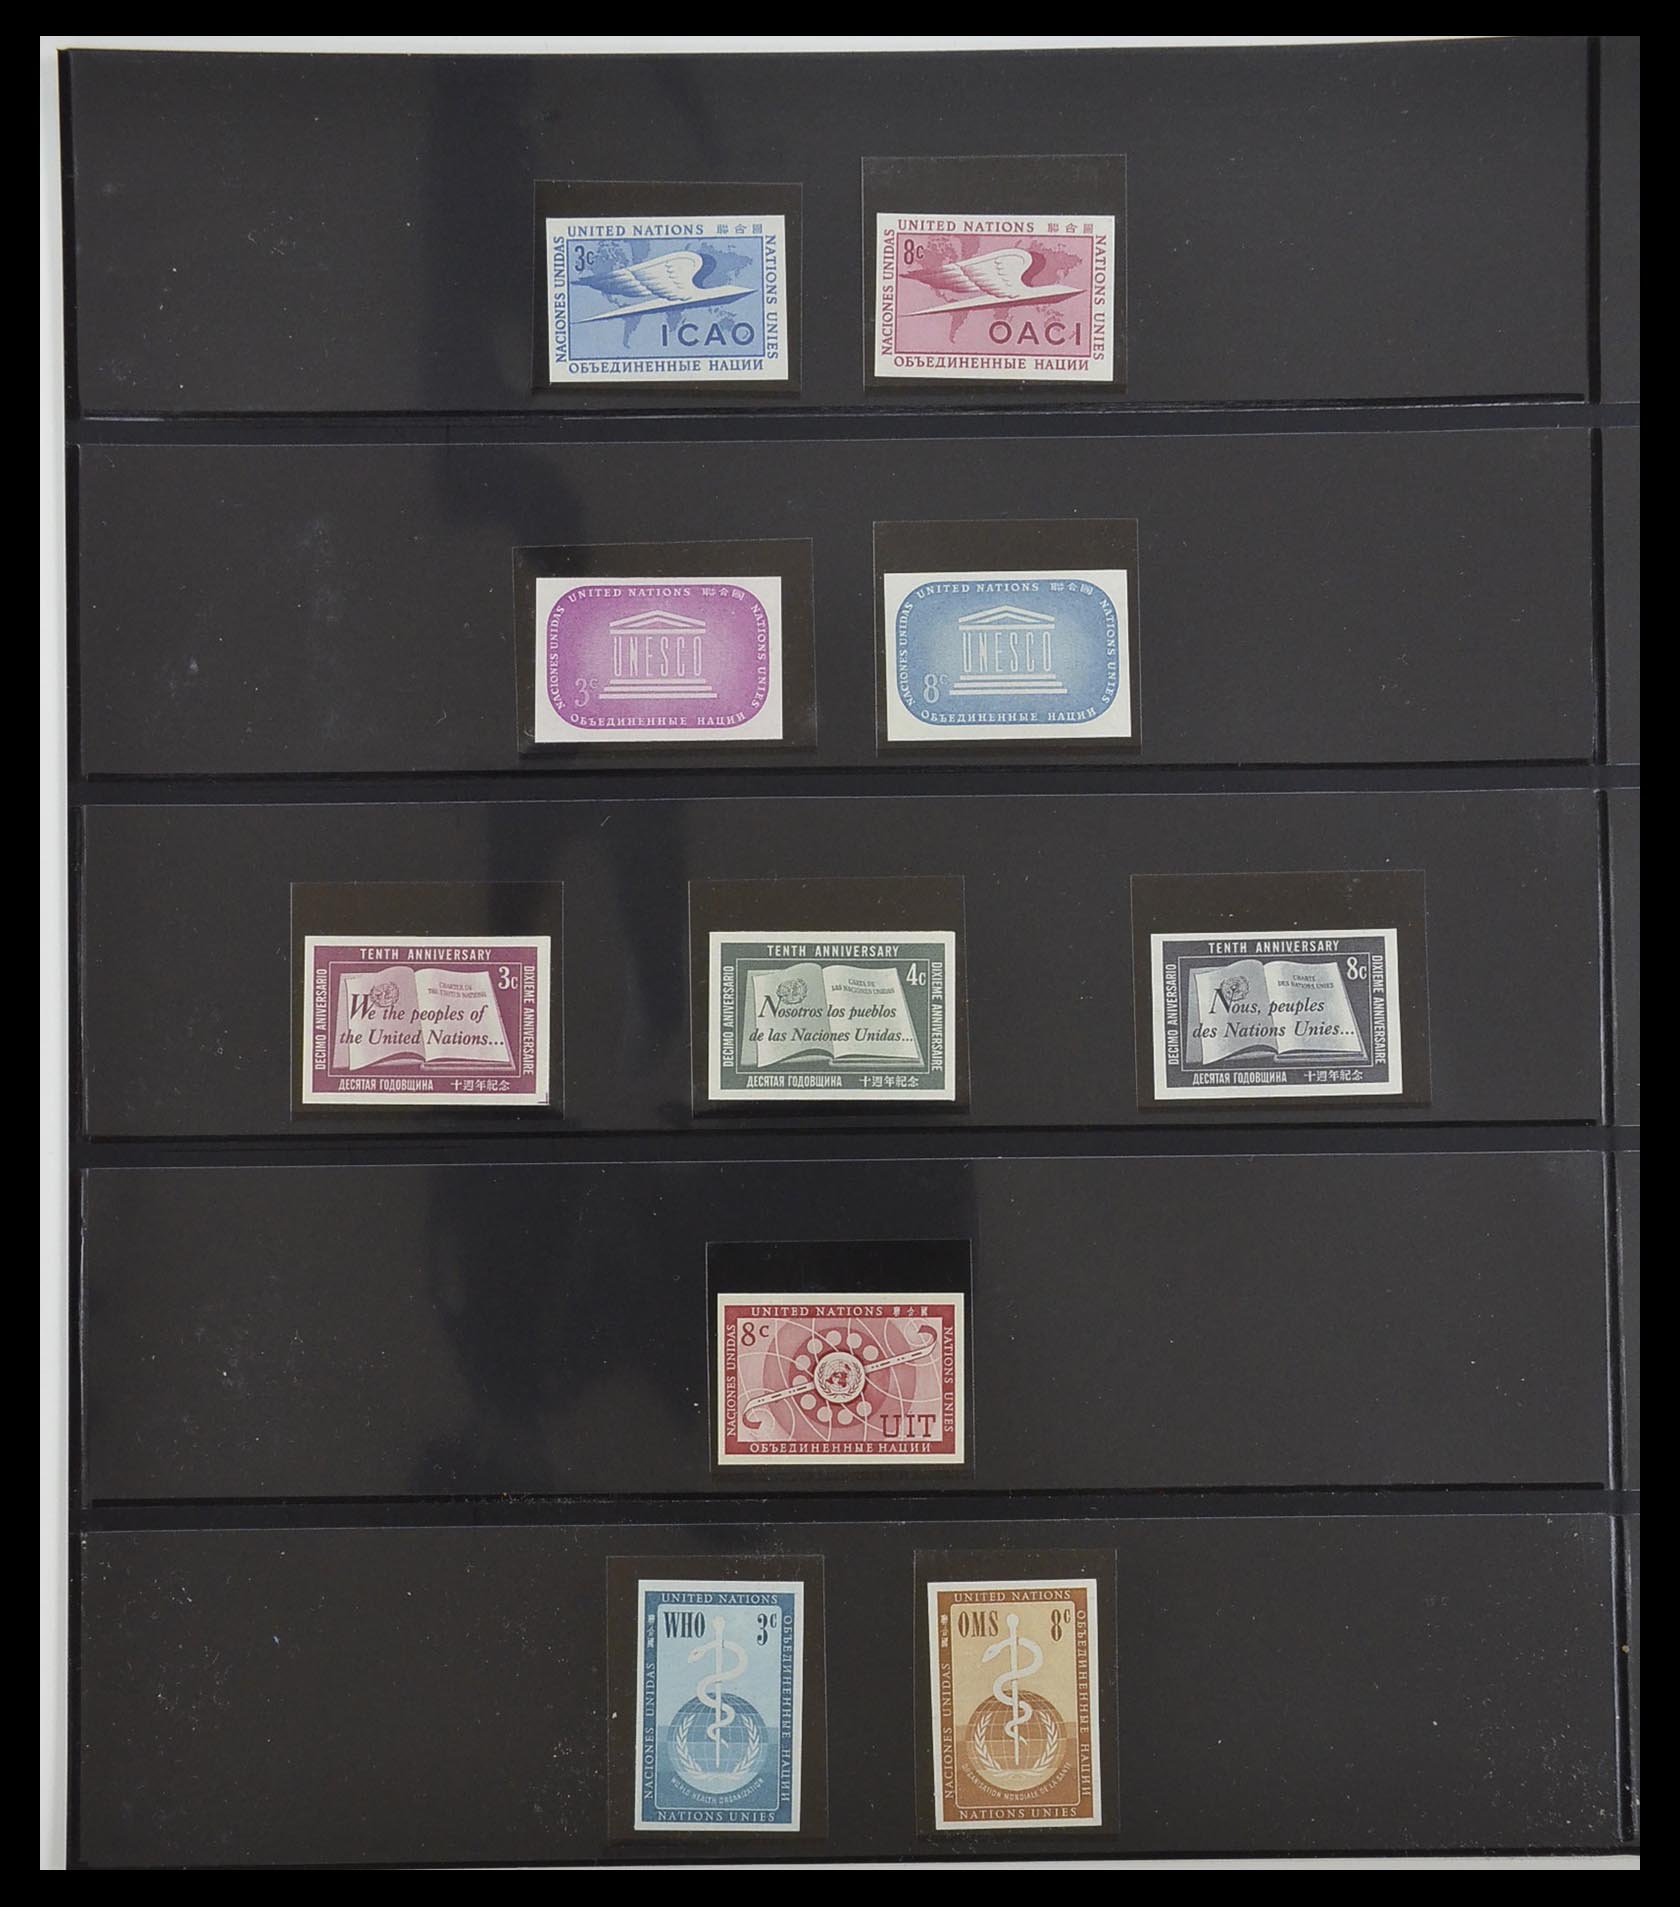 33300 002 - Stamp collection 33300 United Nations imperforated and proofs 1953-1998.